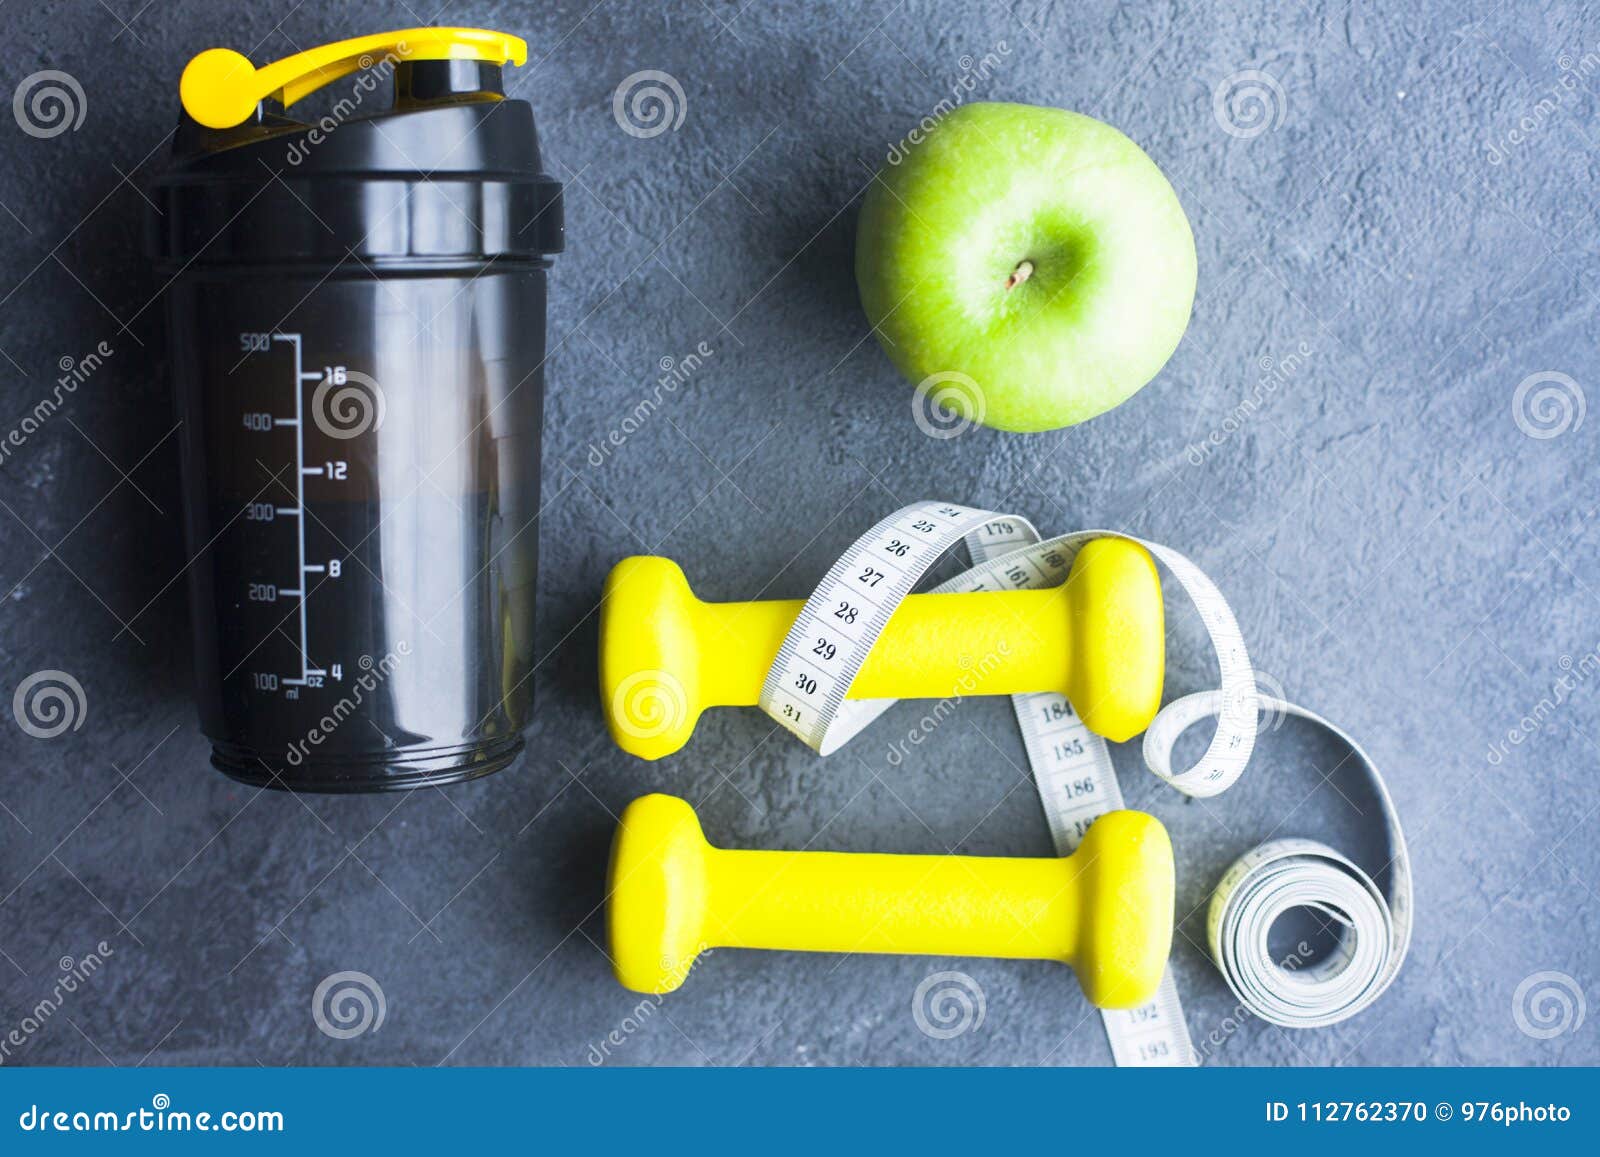 Loosing weight concept stock photo. Image of sport, nutrition - 112762370